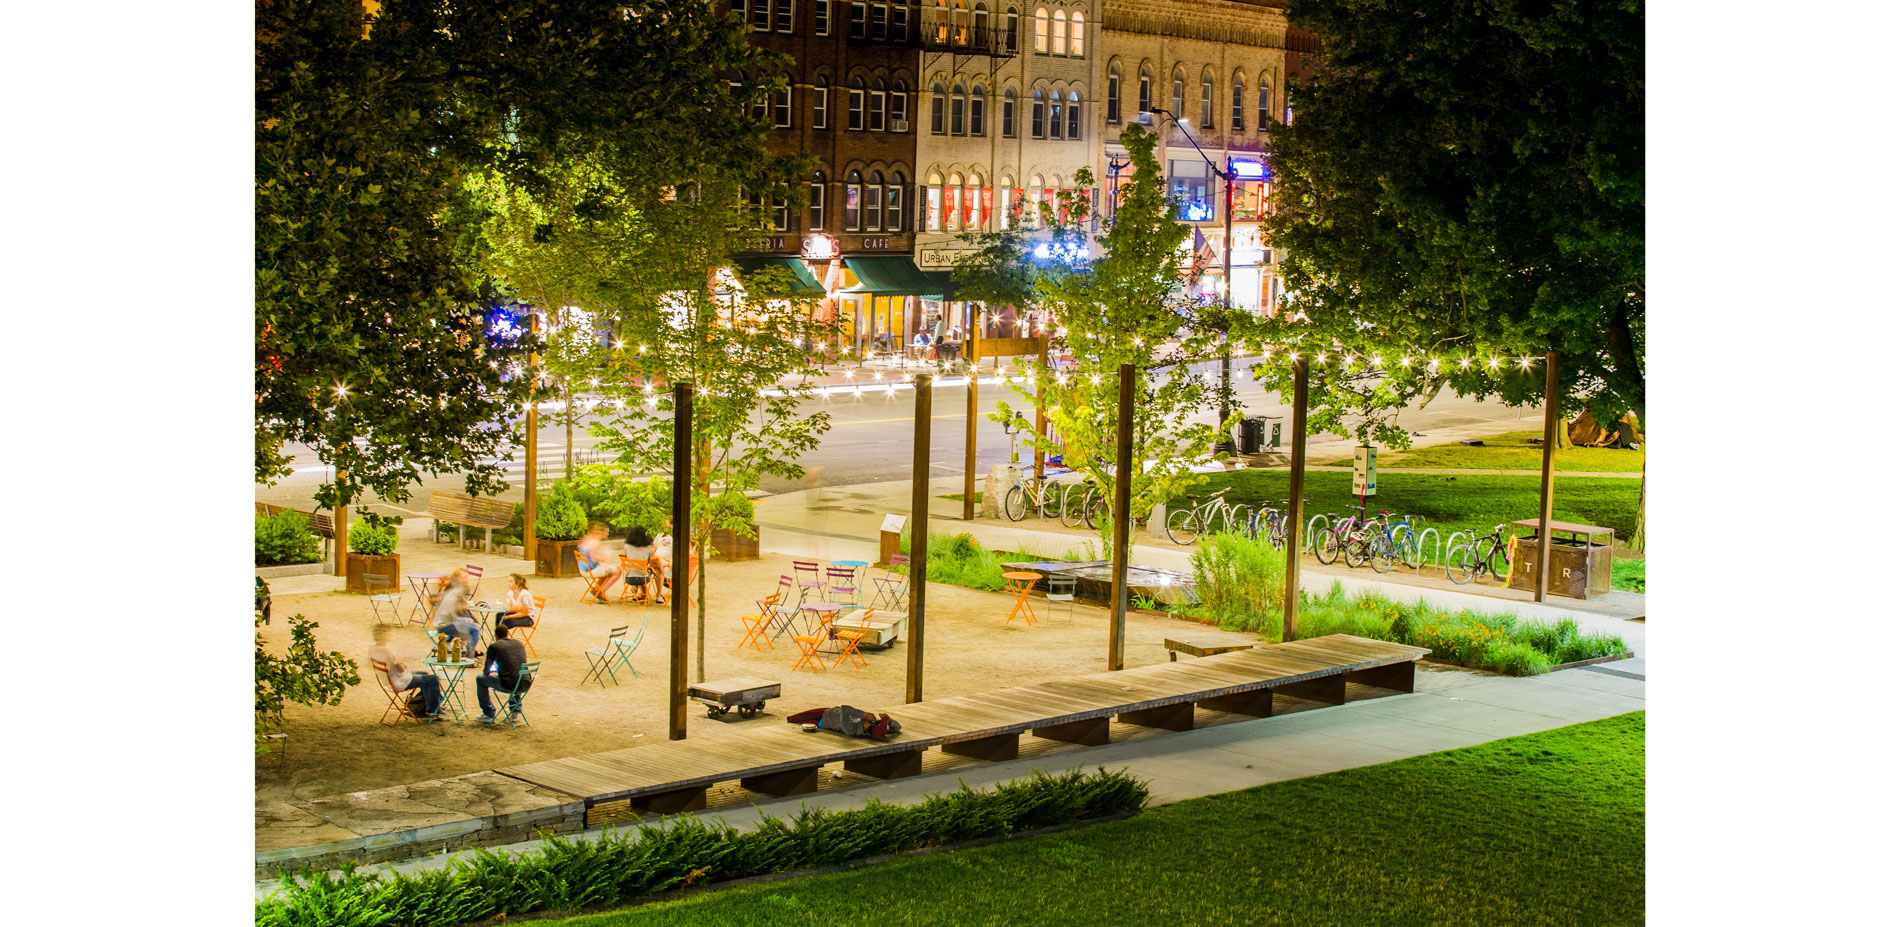 At the edge of the lawn and plaza an 80’ long urban lounge of black locust and steel offers flexible gathering, sleeping, play and a ping pong surface…